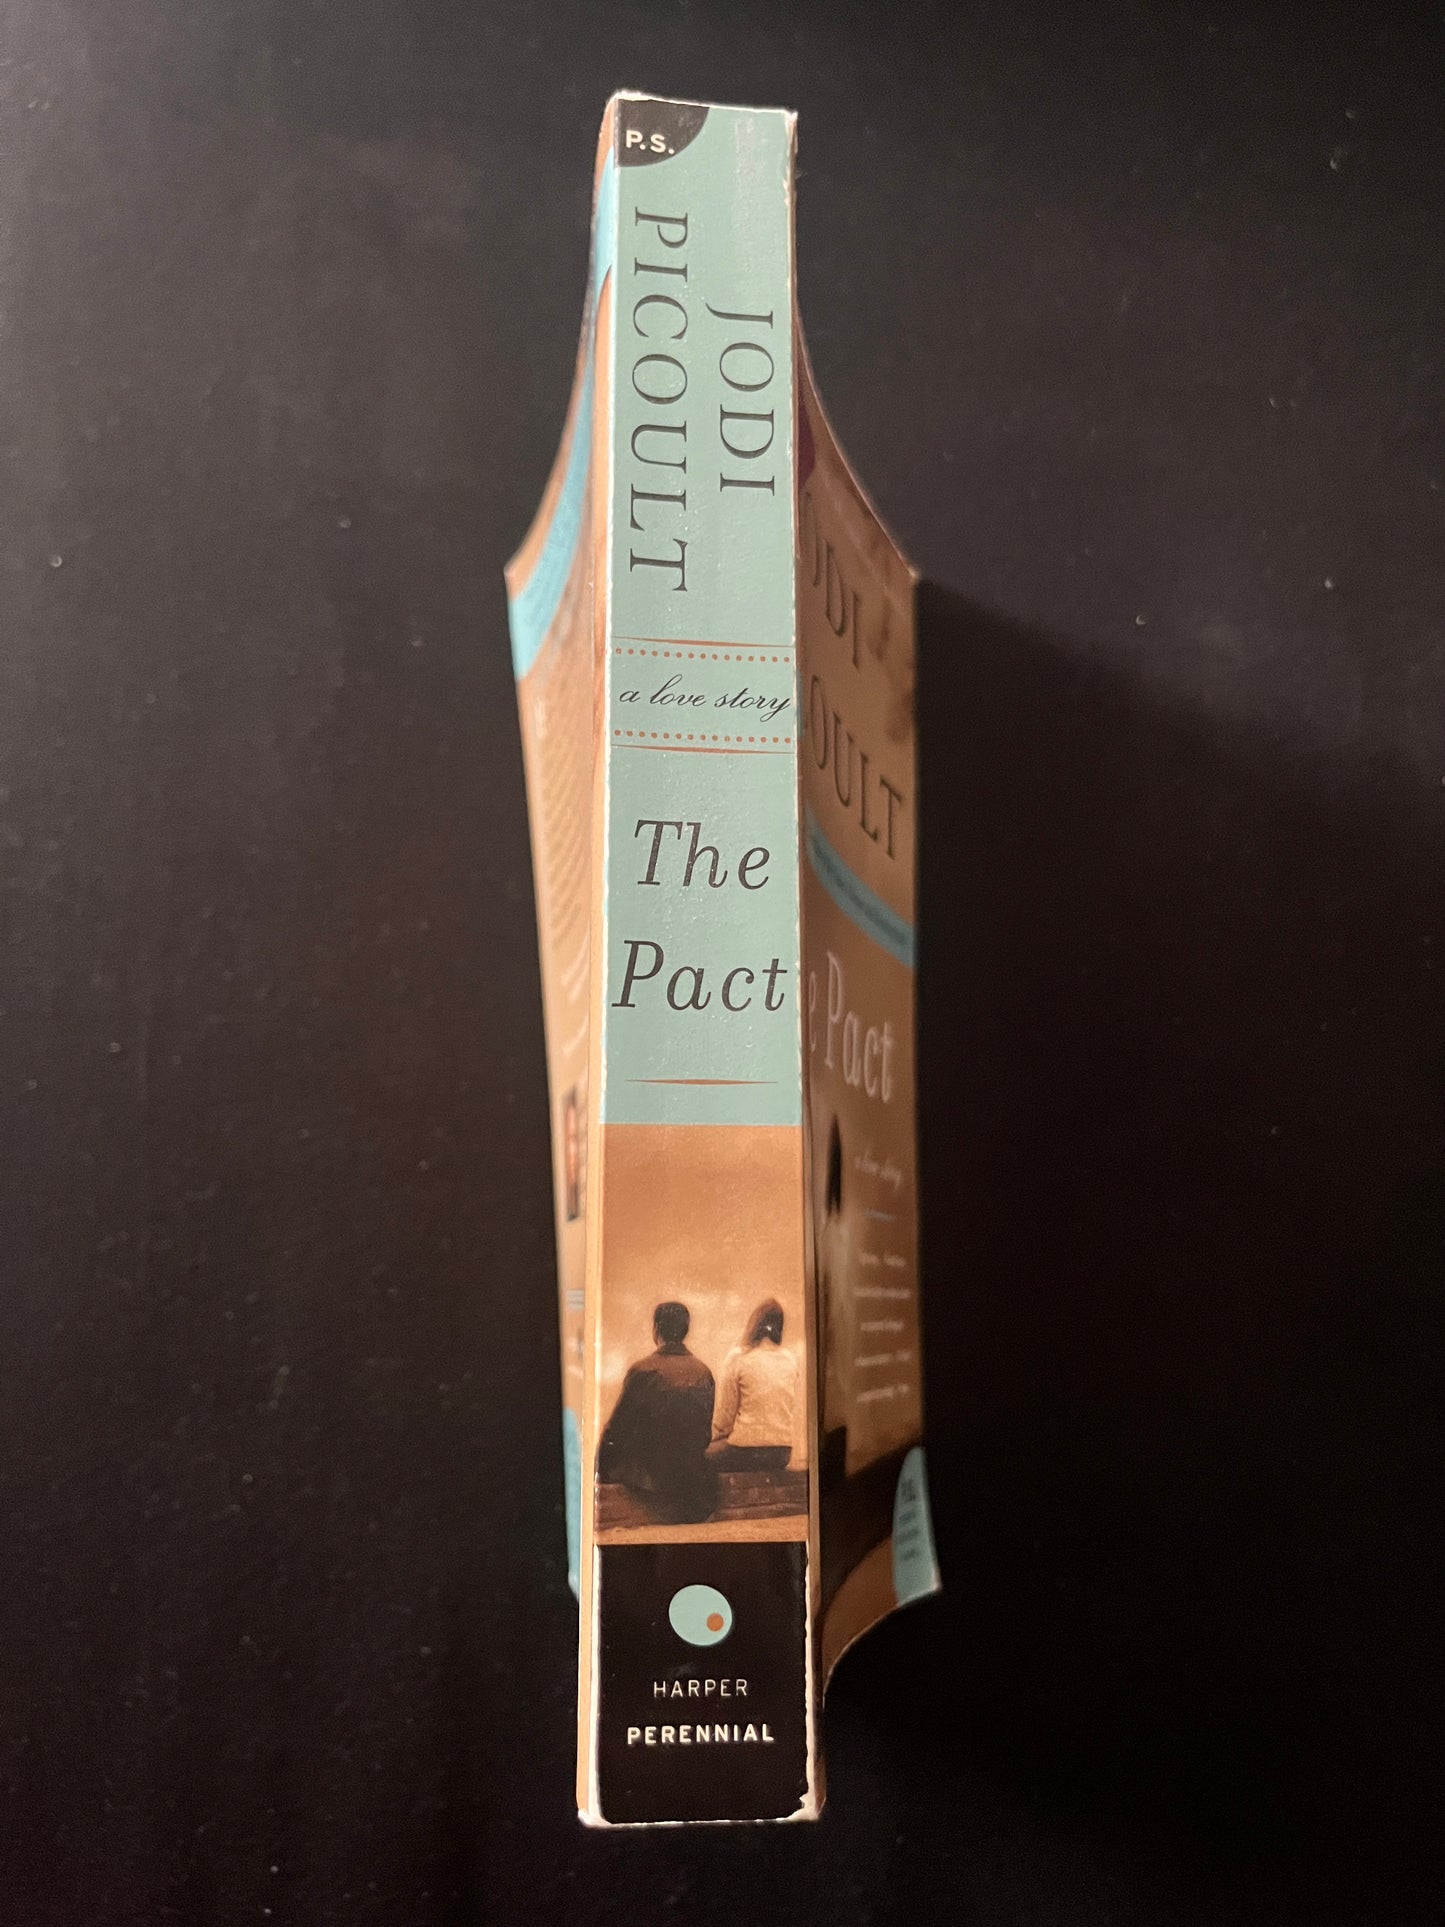 THE PACT by Jodi Picoult